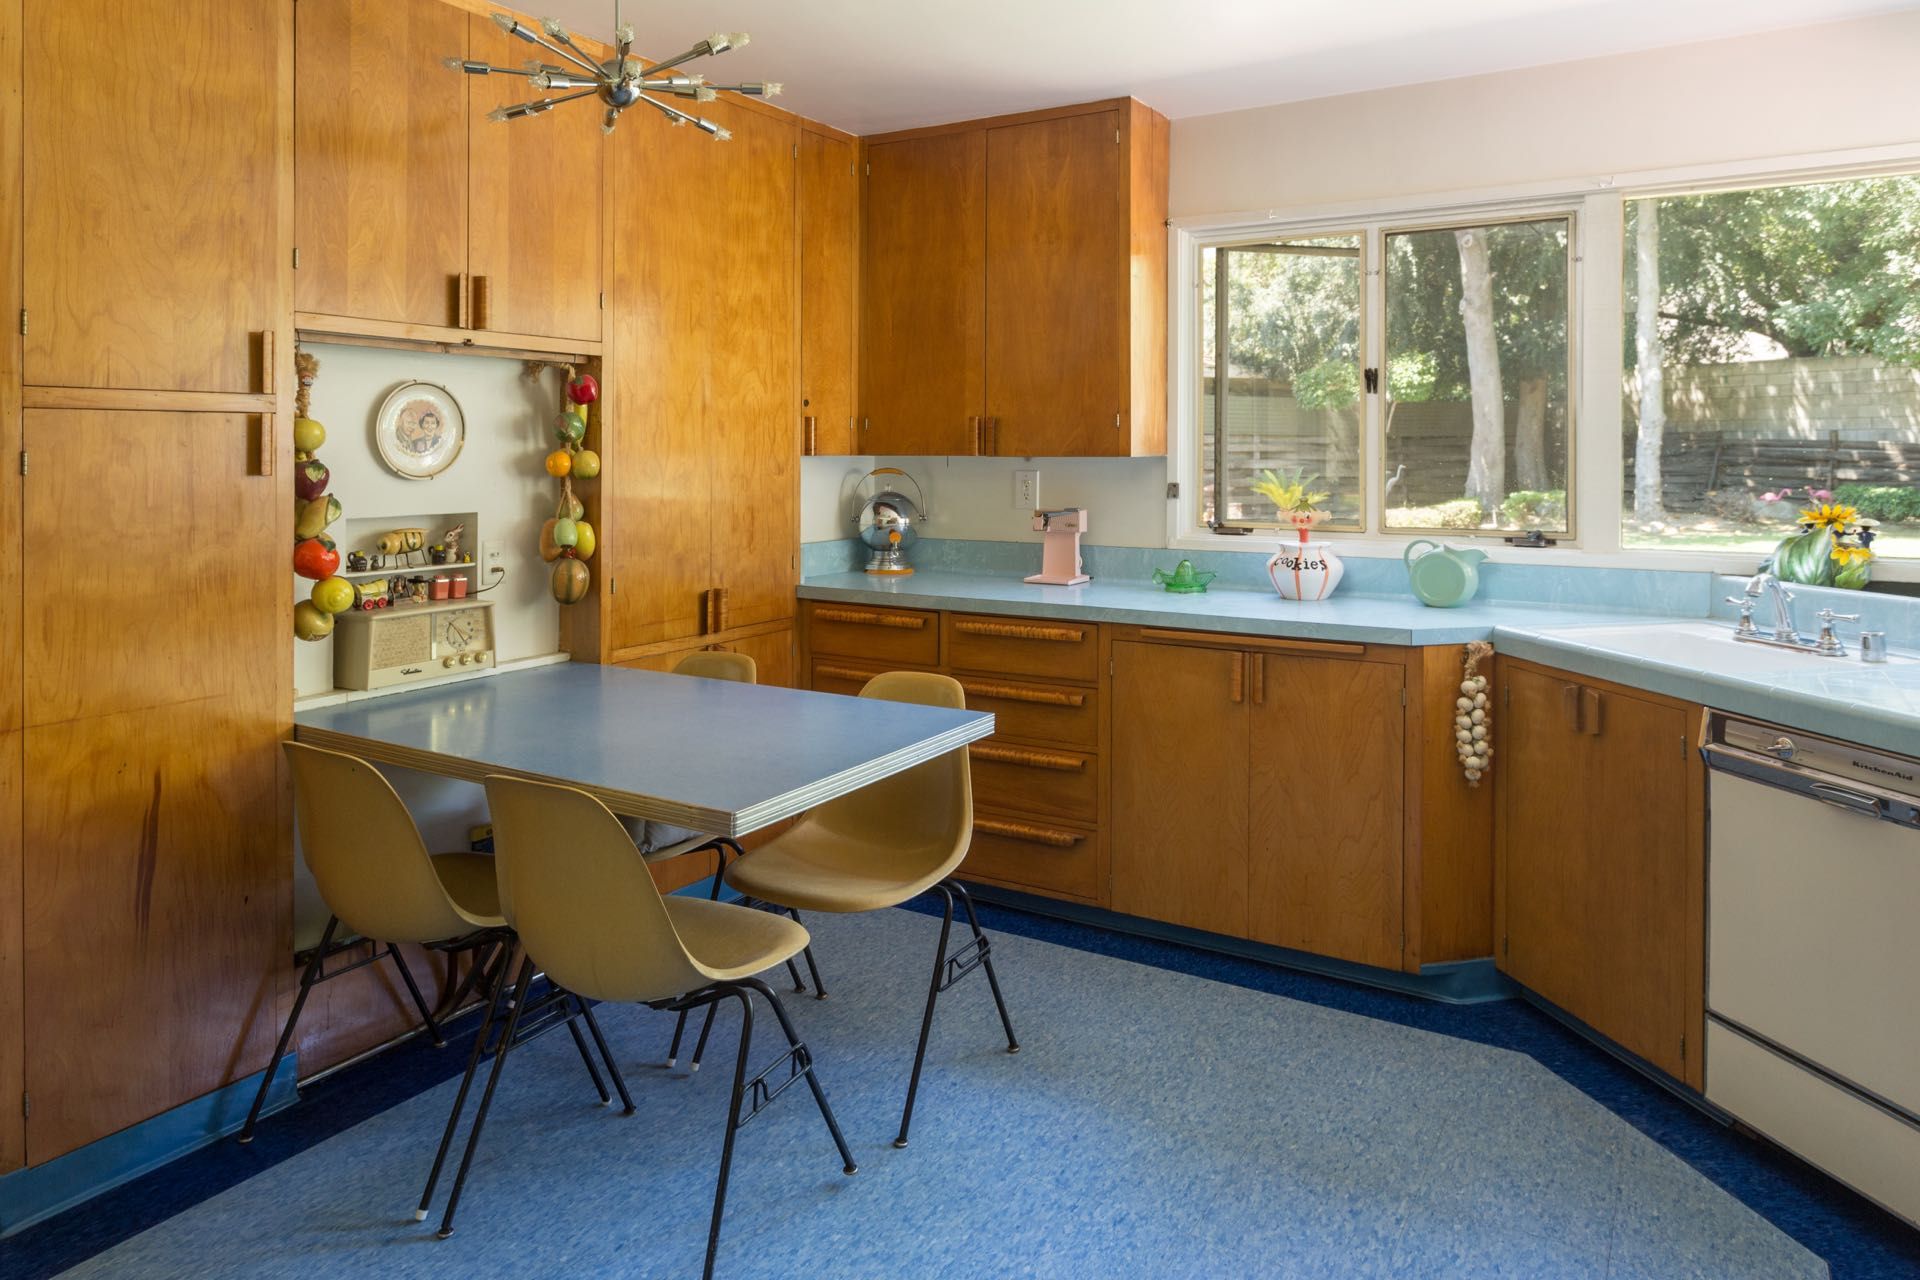 6 Lessons In Retro Style From A Smart, Mid-century Kitchen